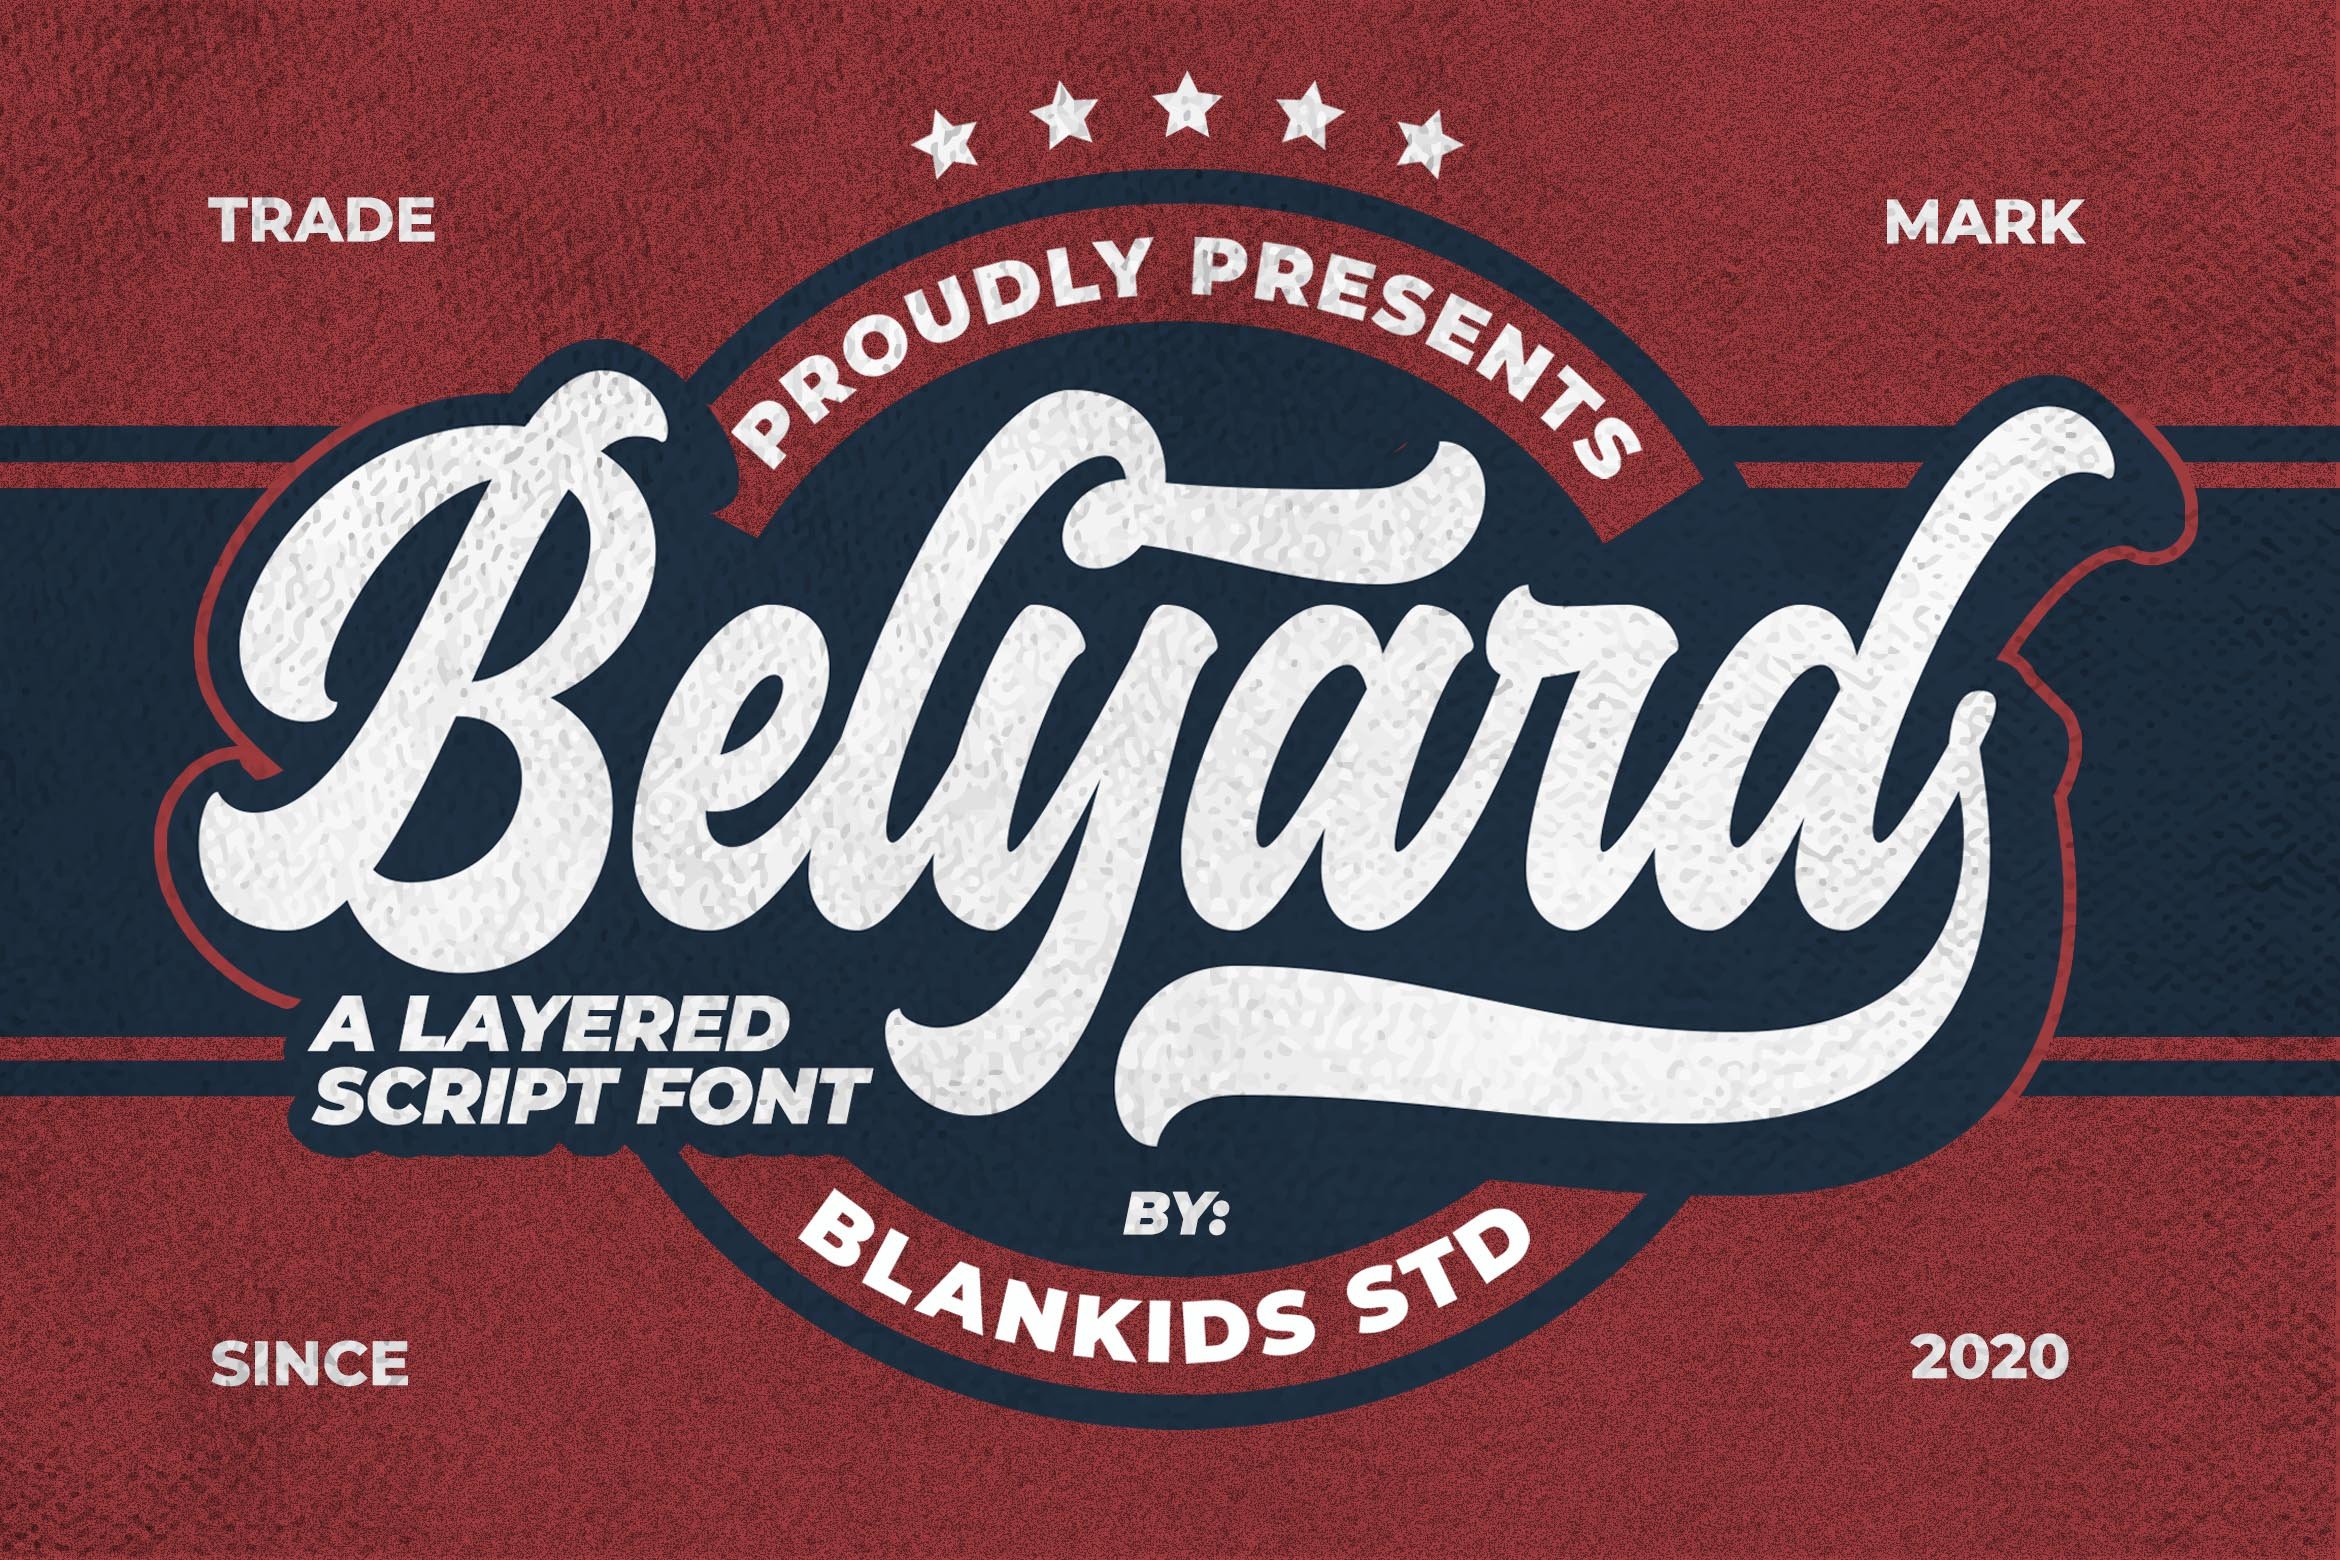 Belyard - Layered Script Font cover image.